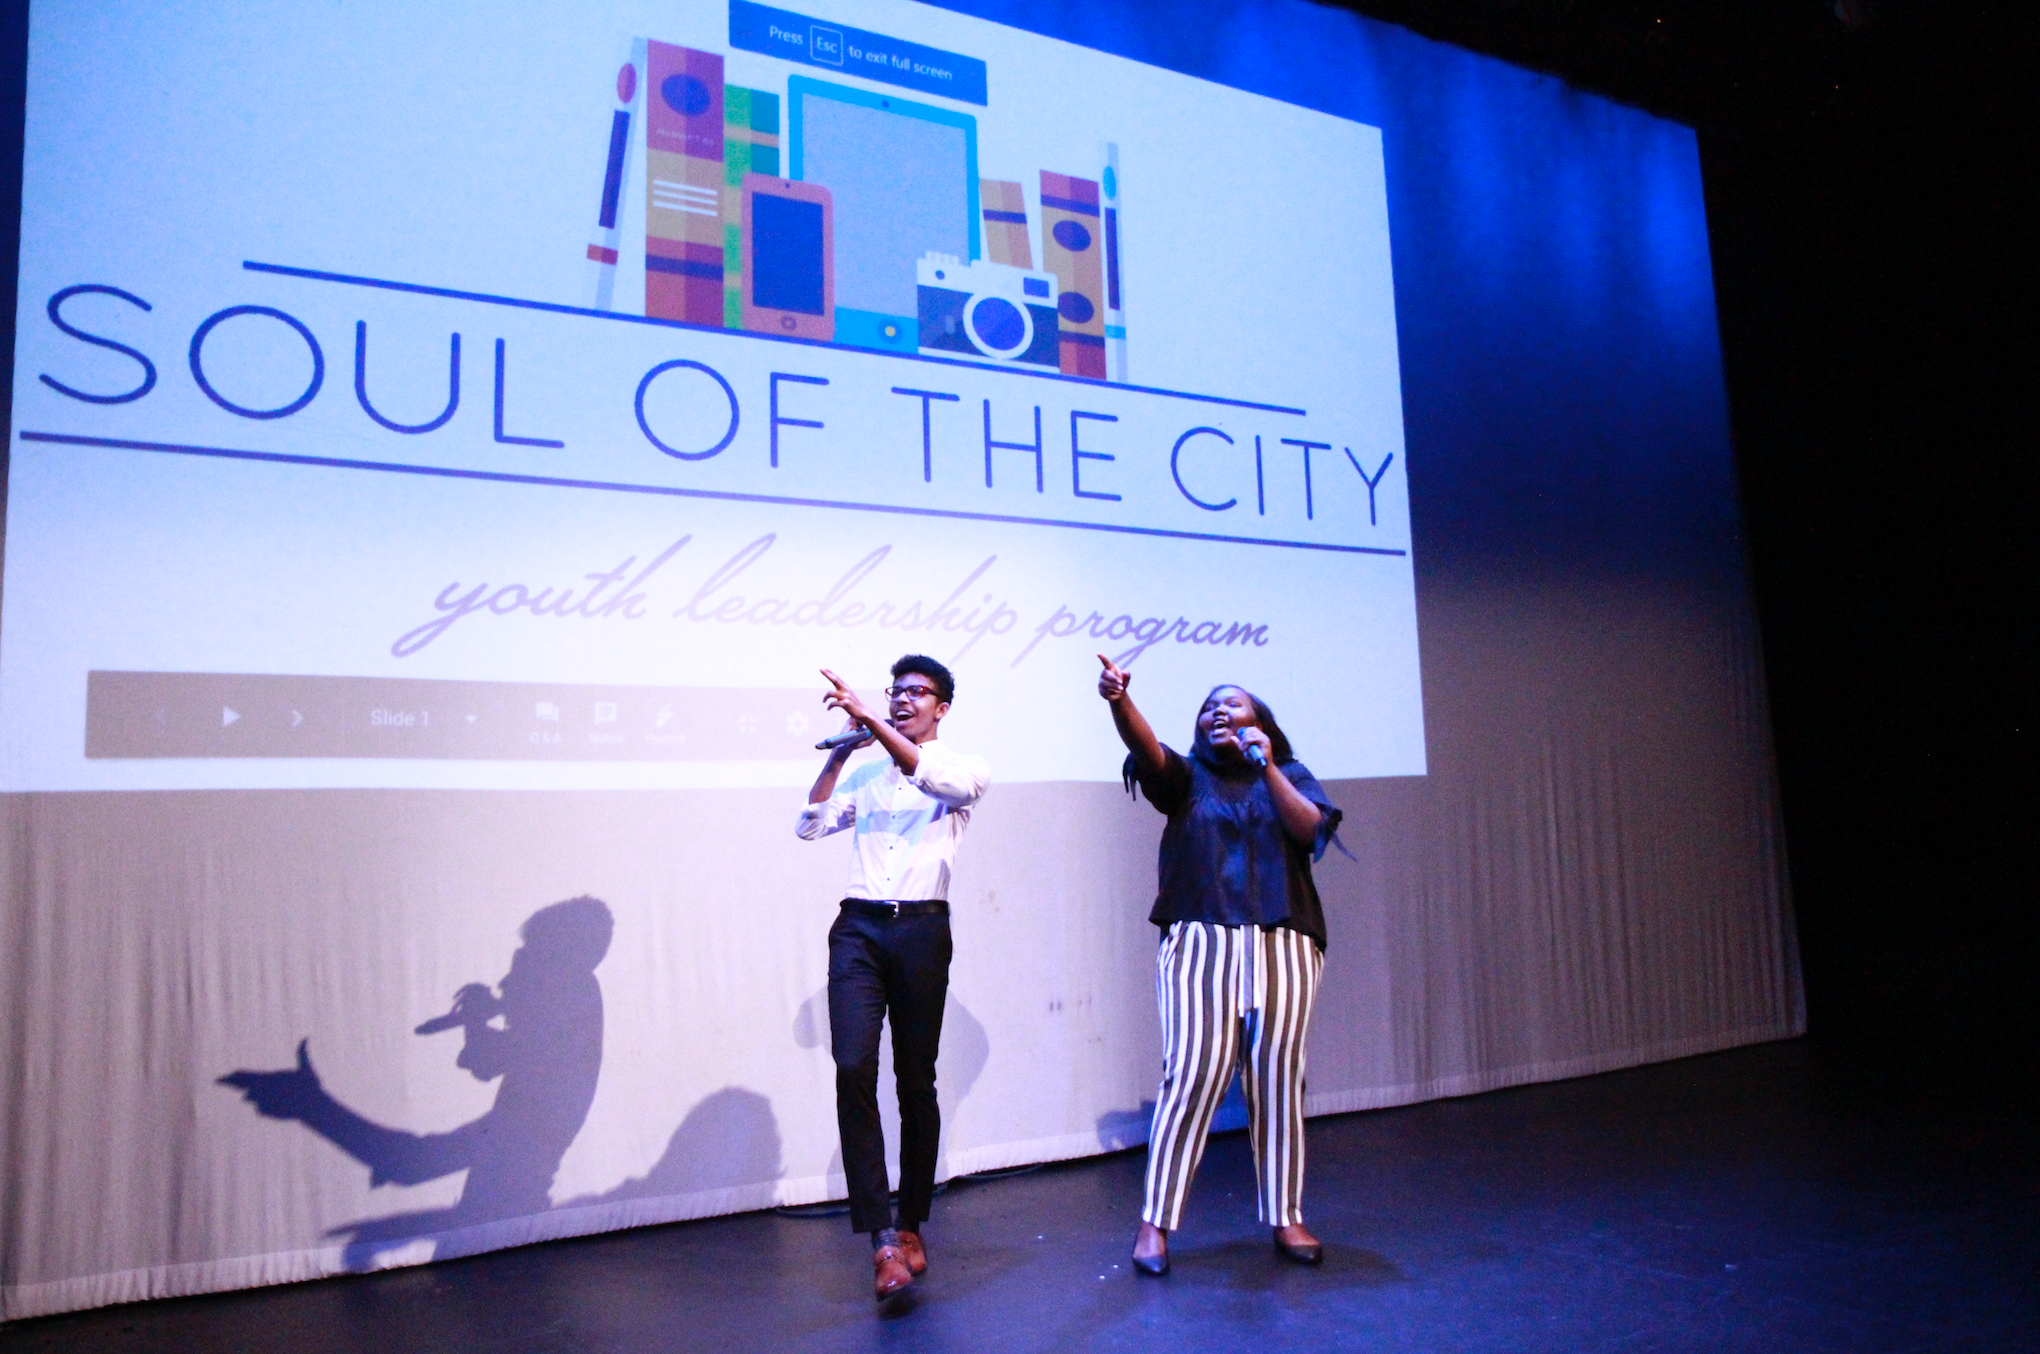 Student journalists lead the final presentations of the Soul of the City program. Image by Kate Karstens. United States, 2018.